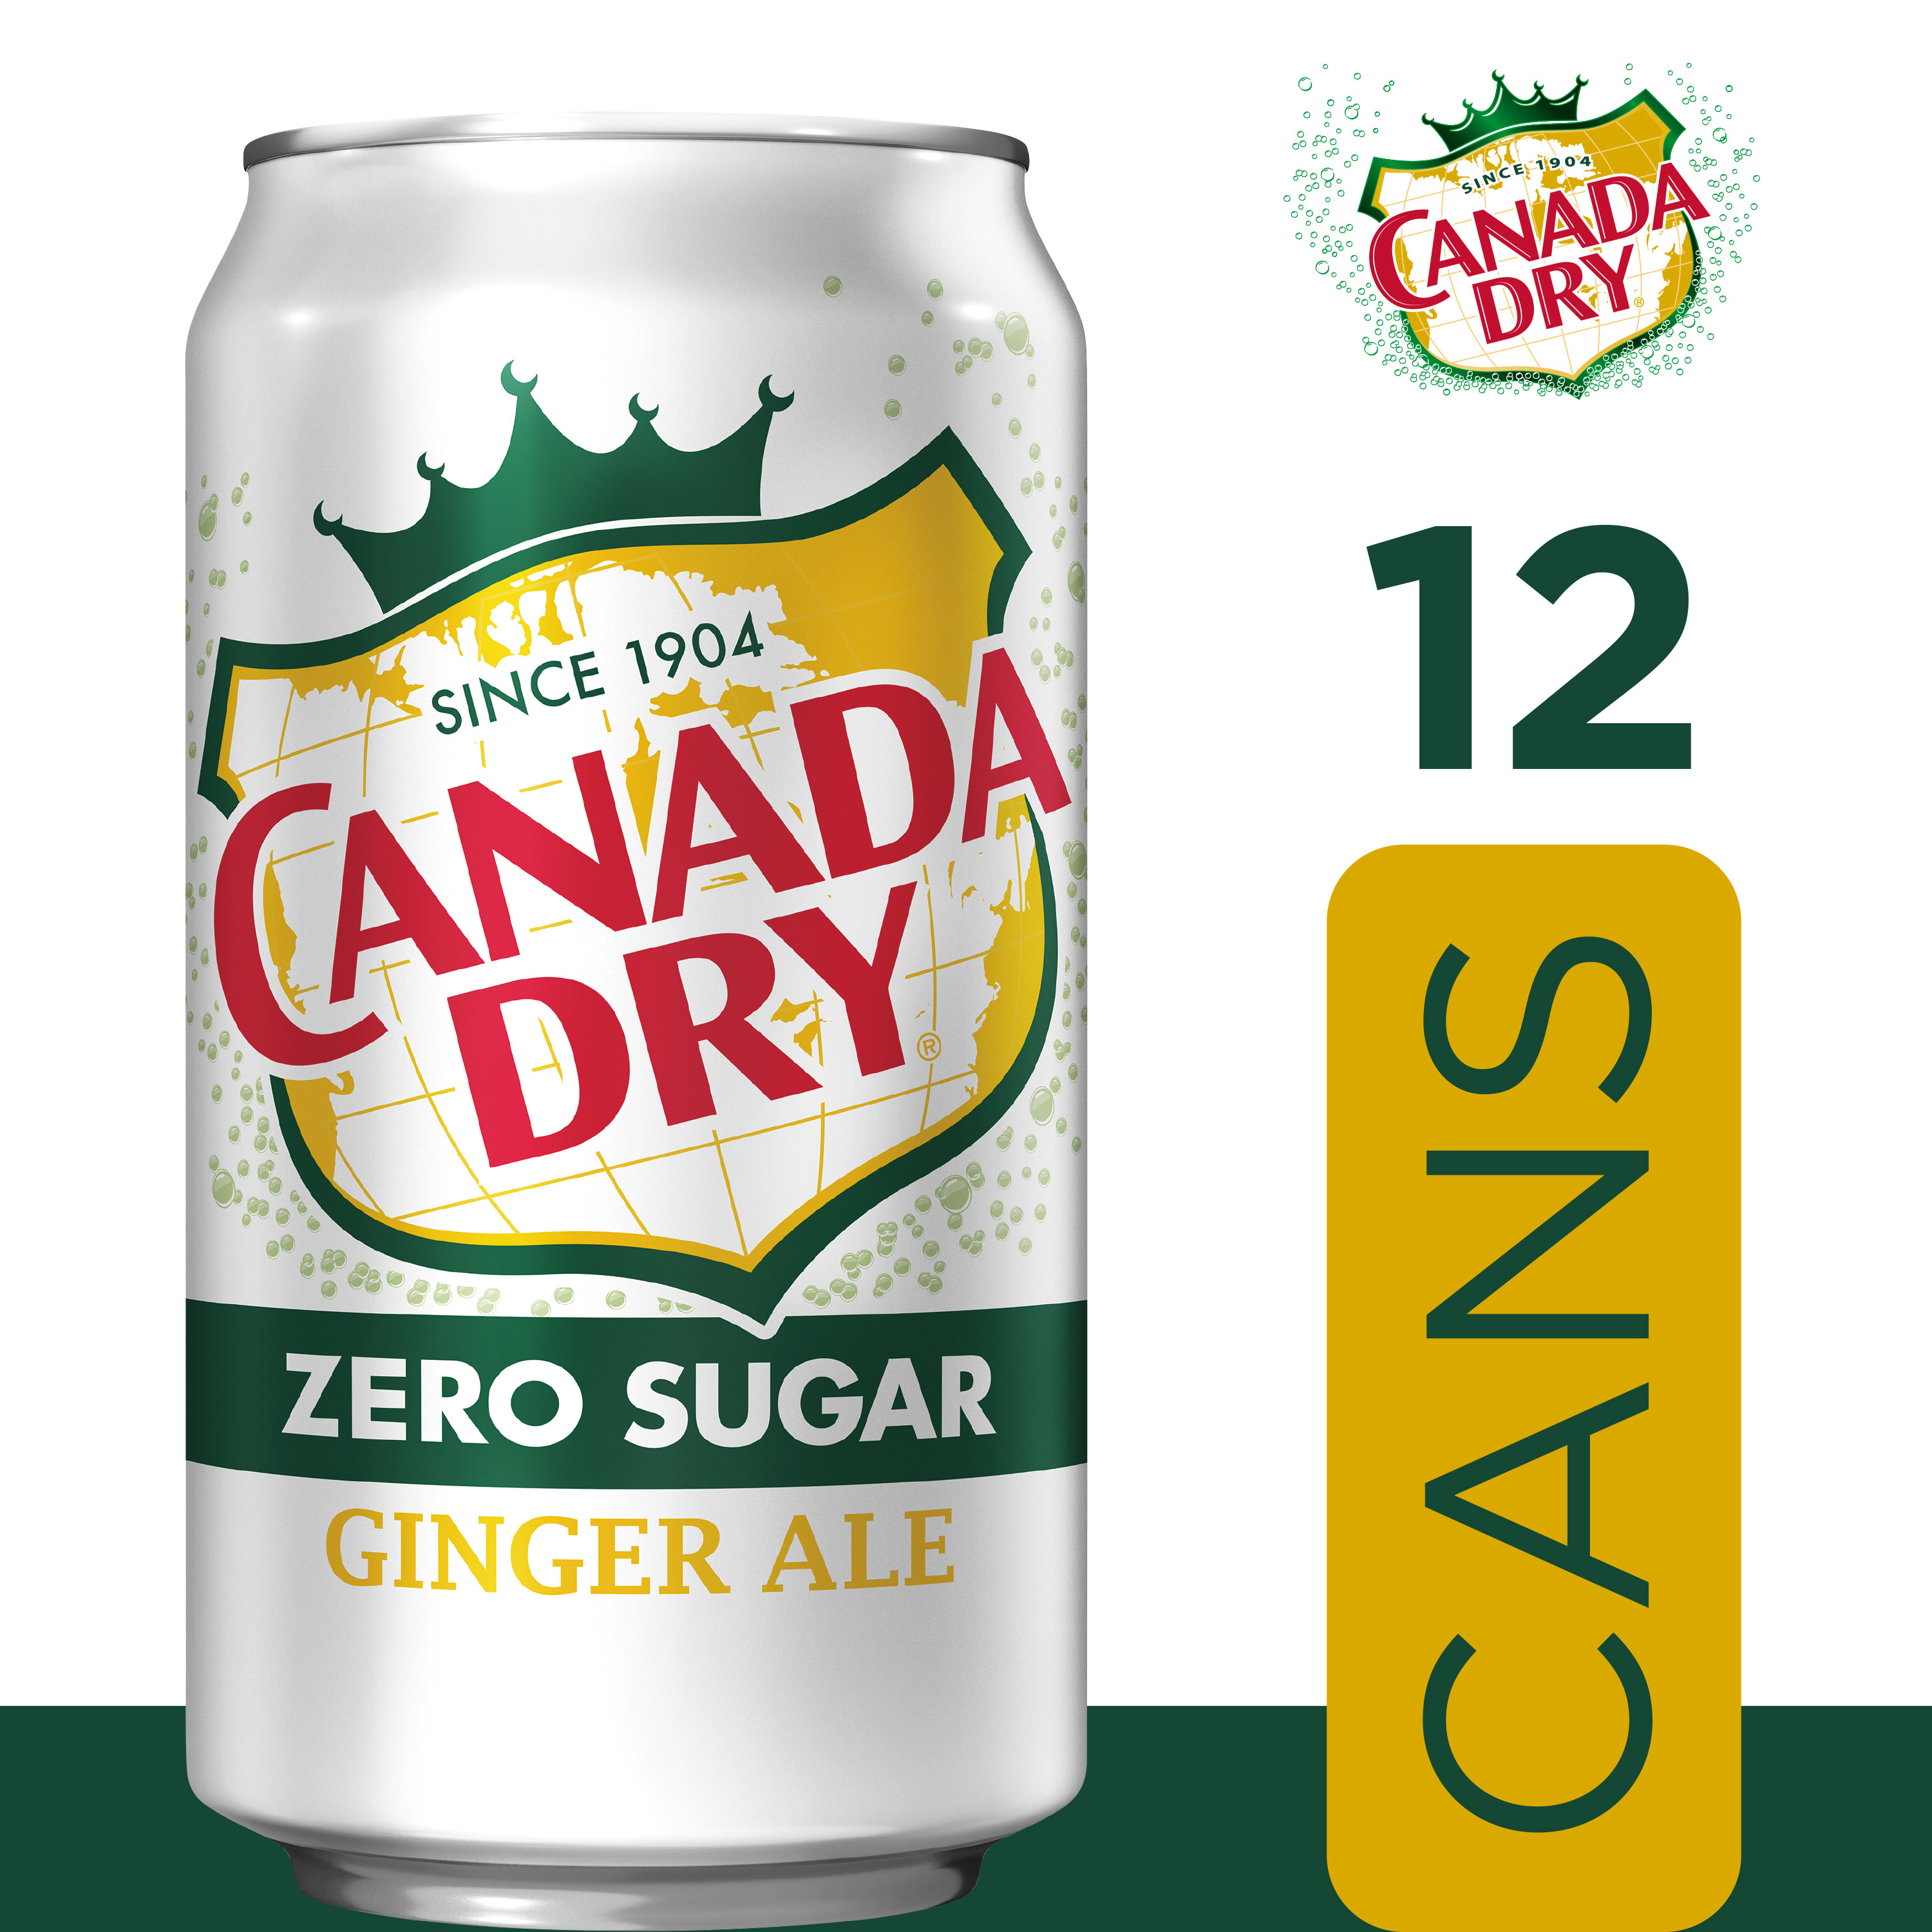 Canada Dry Zero Sugar Ginger Ale Soda Pop, 12 fl oz, 12 Pack Cans - image 5 of 13